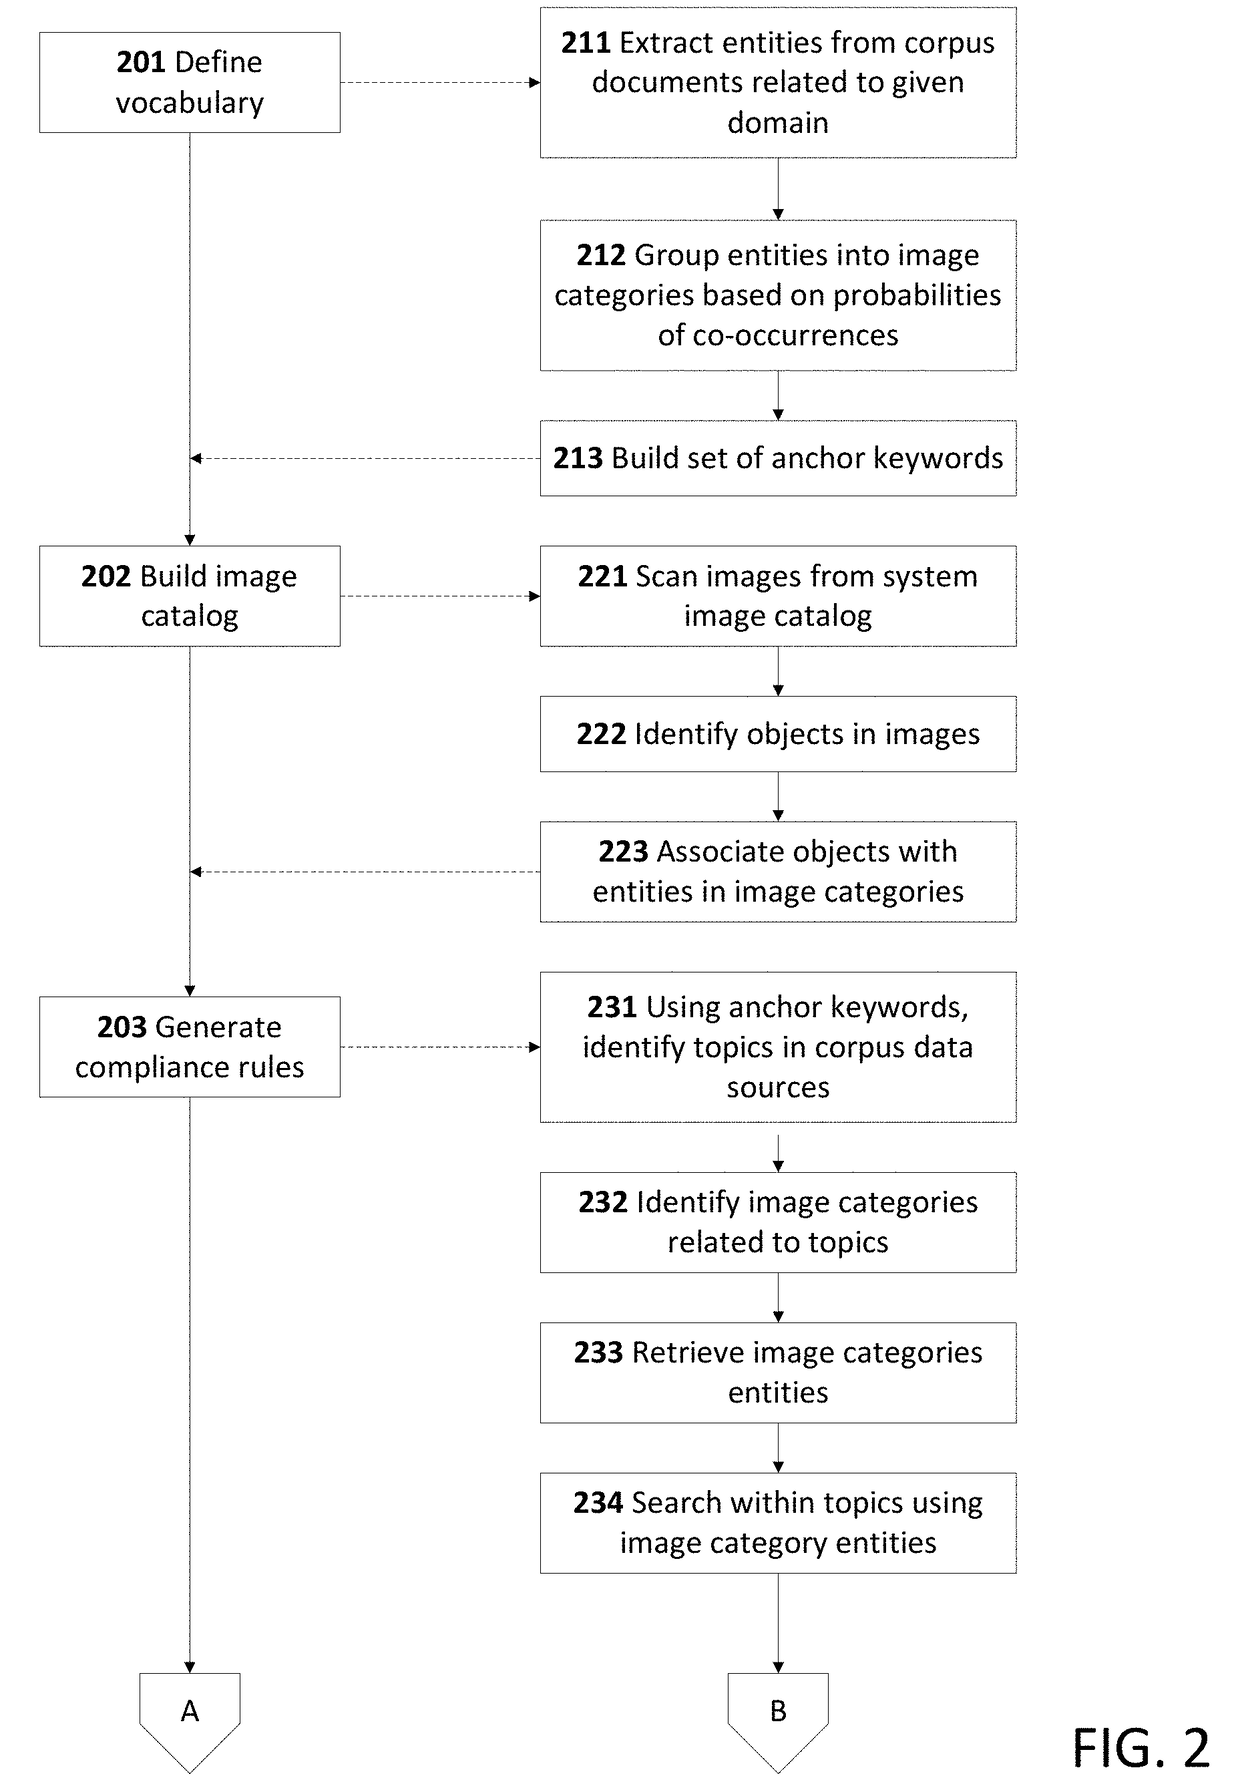 Smart image filtering method with domain rules application